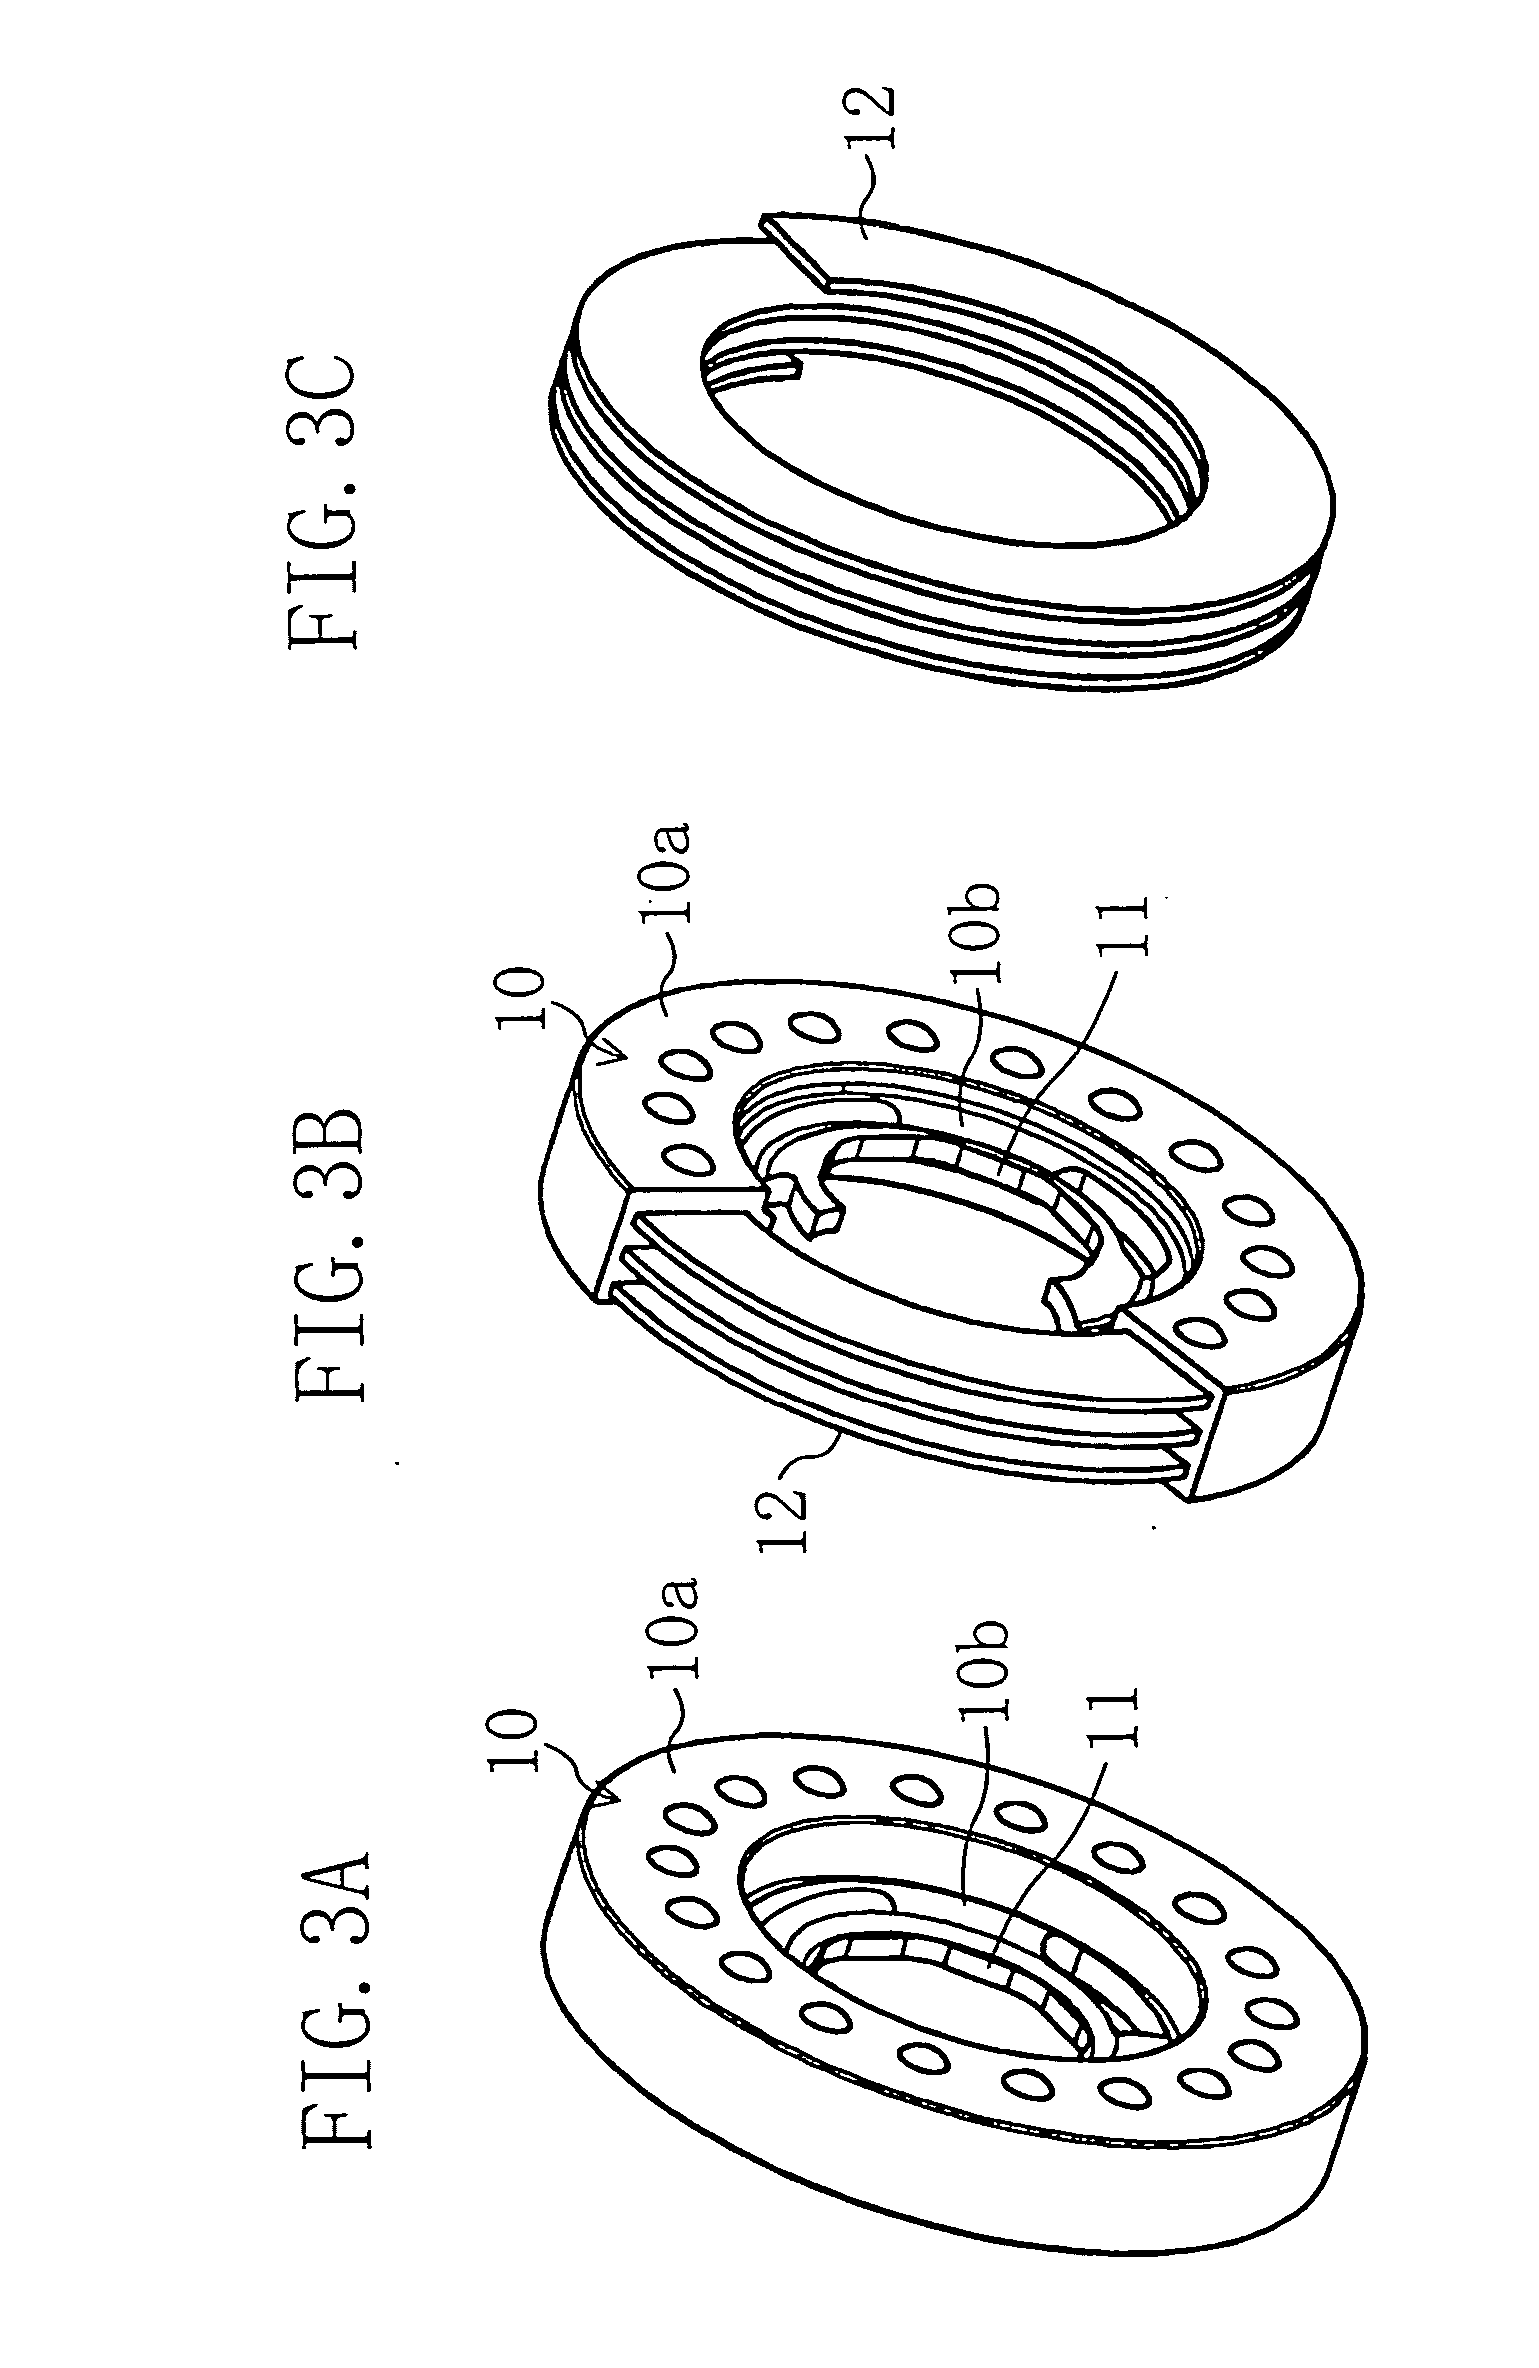 Vibration absorber with dynamic damper